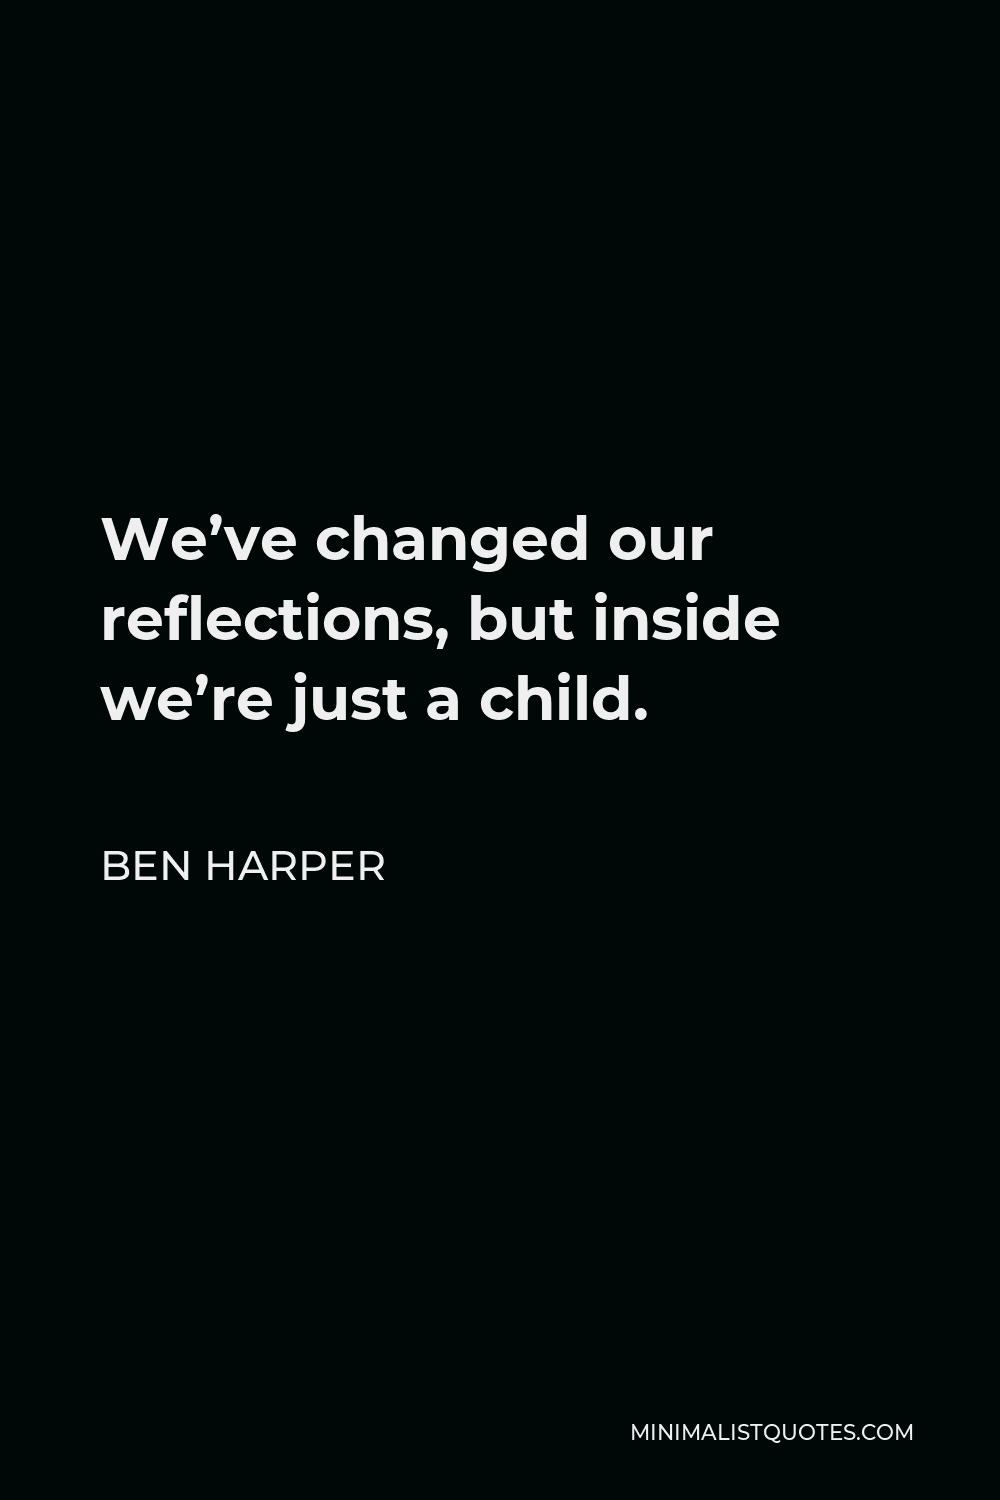 Ben Harper Quote - We’ve changed our reflections, but inside we’re just a child.